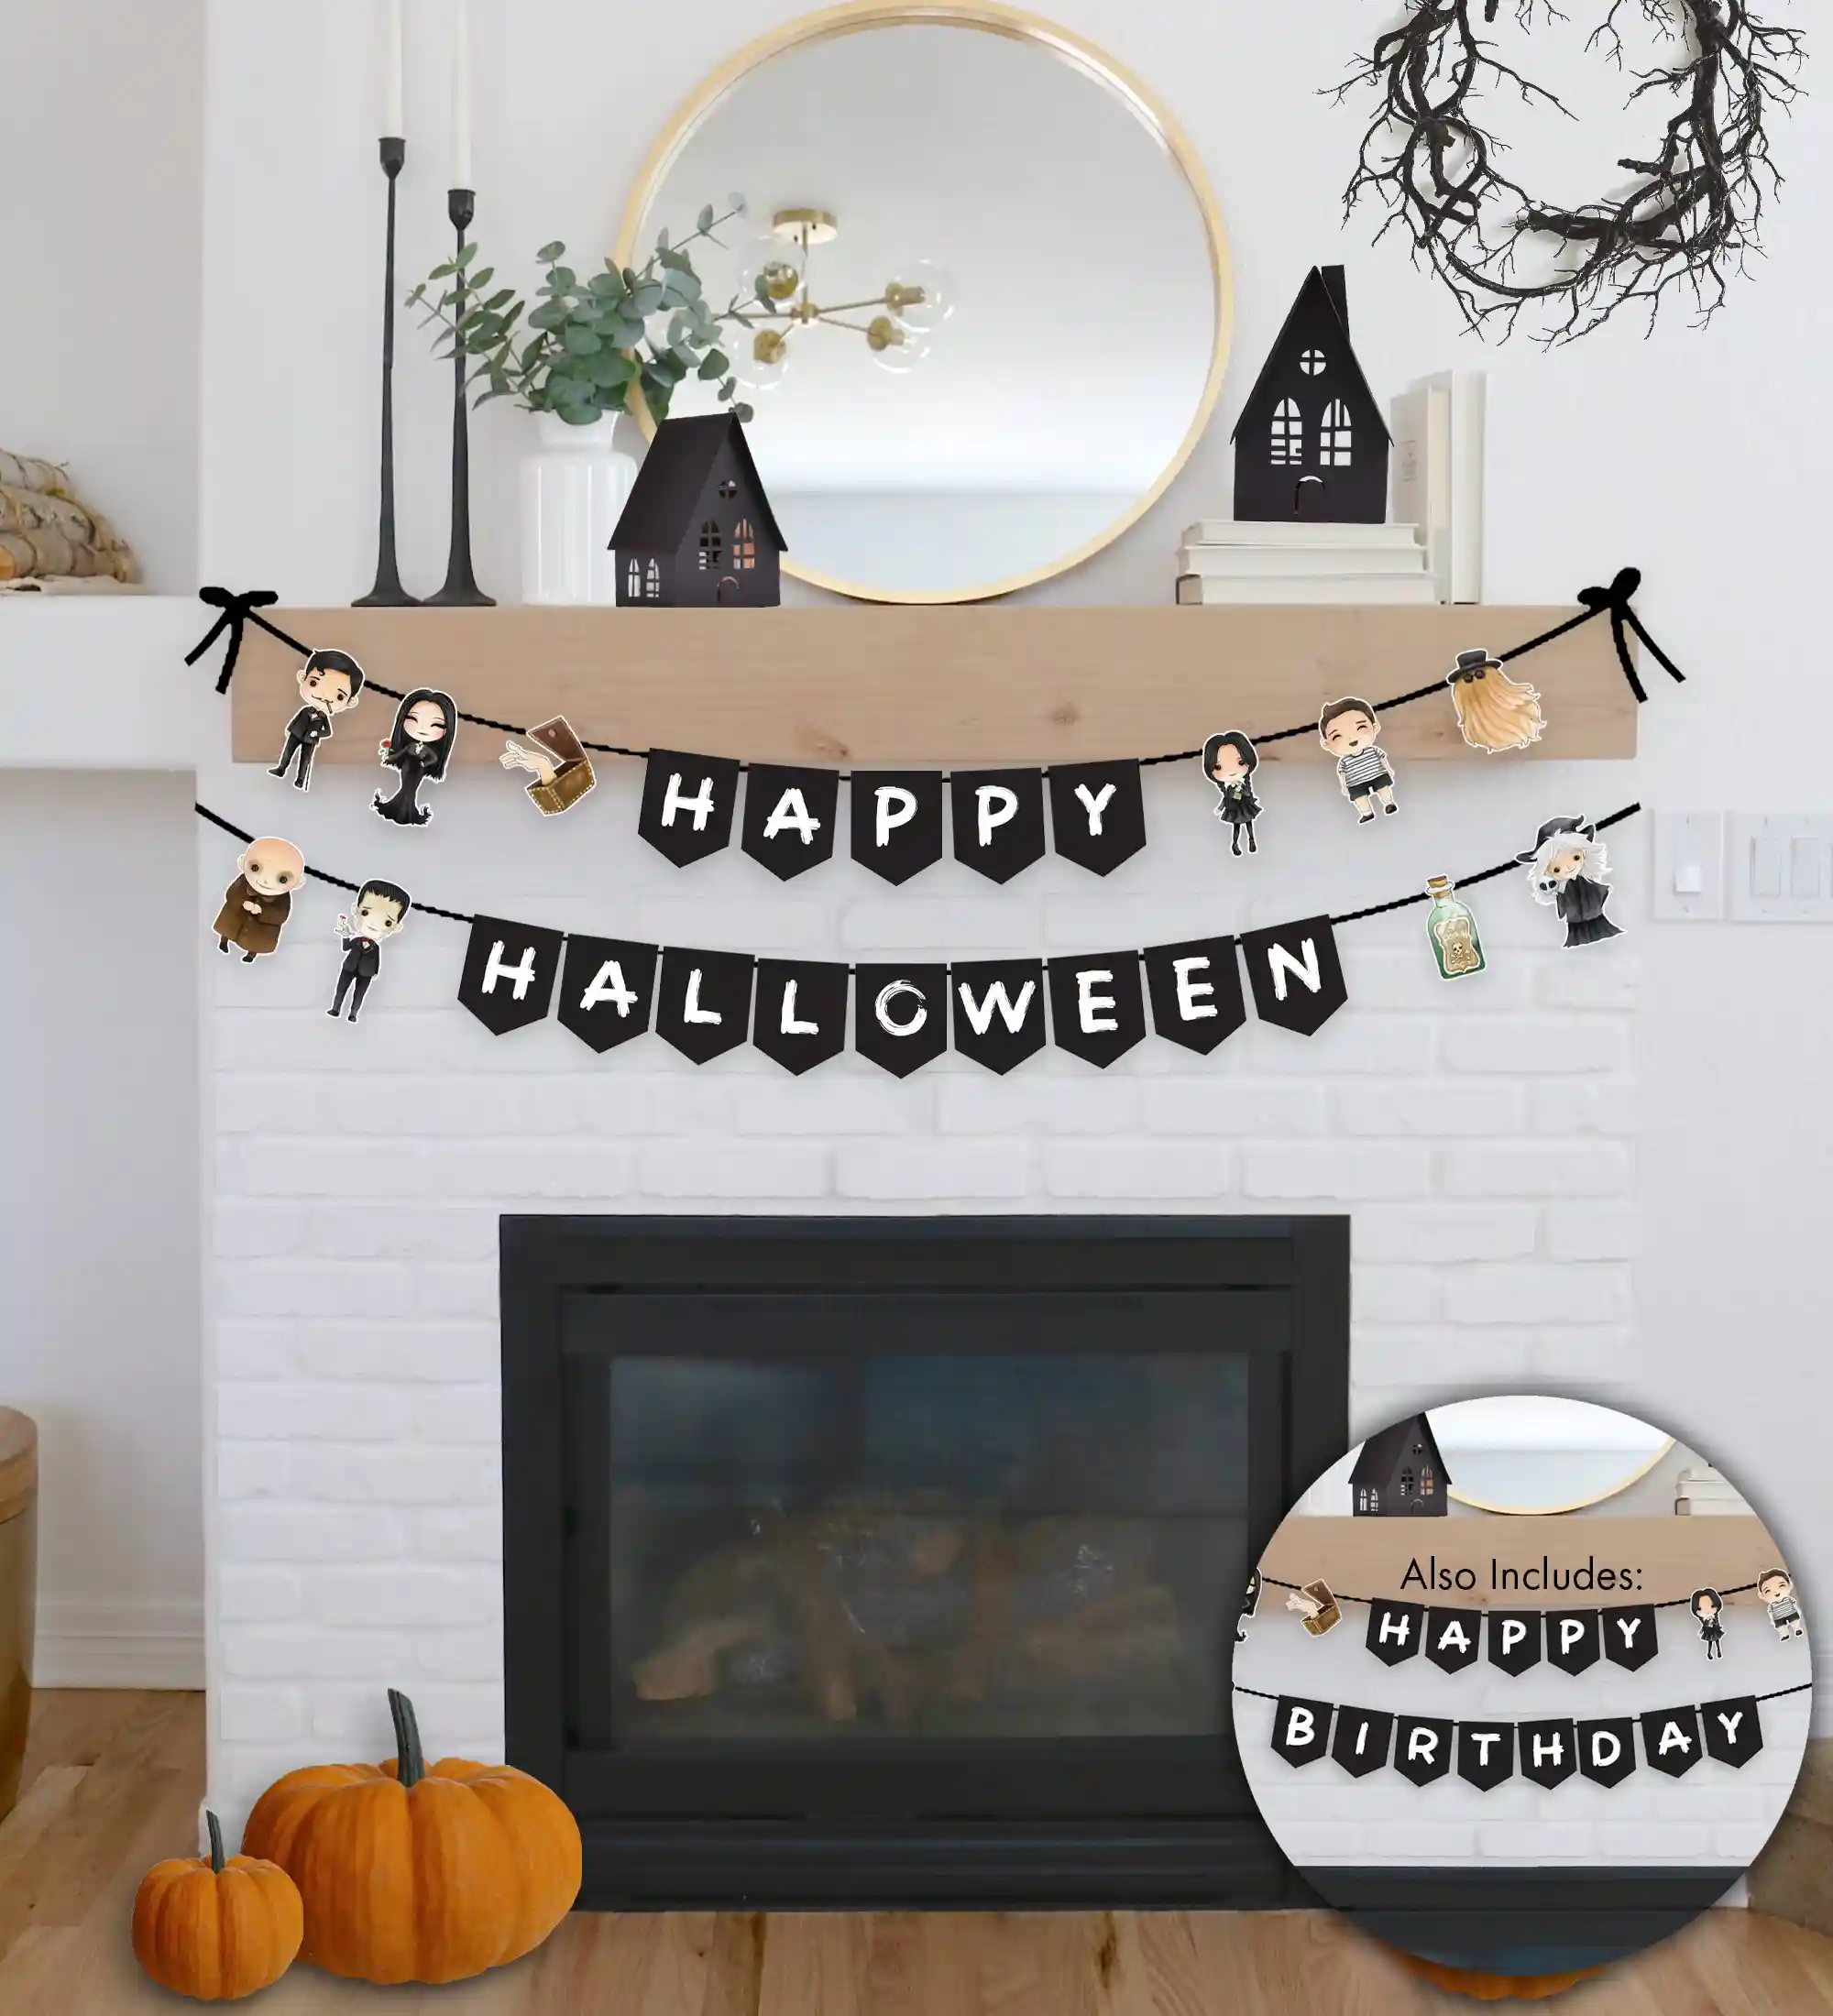 Addams family banner and DIY garland. Includes two options - Happy Halloween banner and Happy Birthday banner. Download the printables for a Wednesday birthday party, Addams Family themed baby shower, or a Wednesday viewing party. Includes all the favorite characters Cousin Itt, Wednesday, Morticia, Gomez, Lurch, Uncle Fester, Pugsley, Thing, and more.